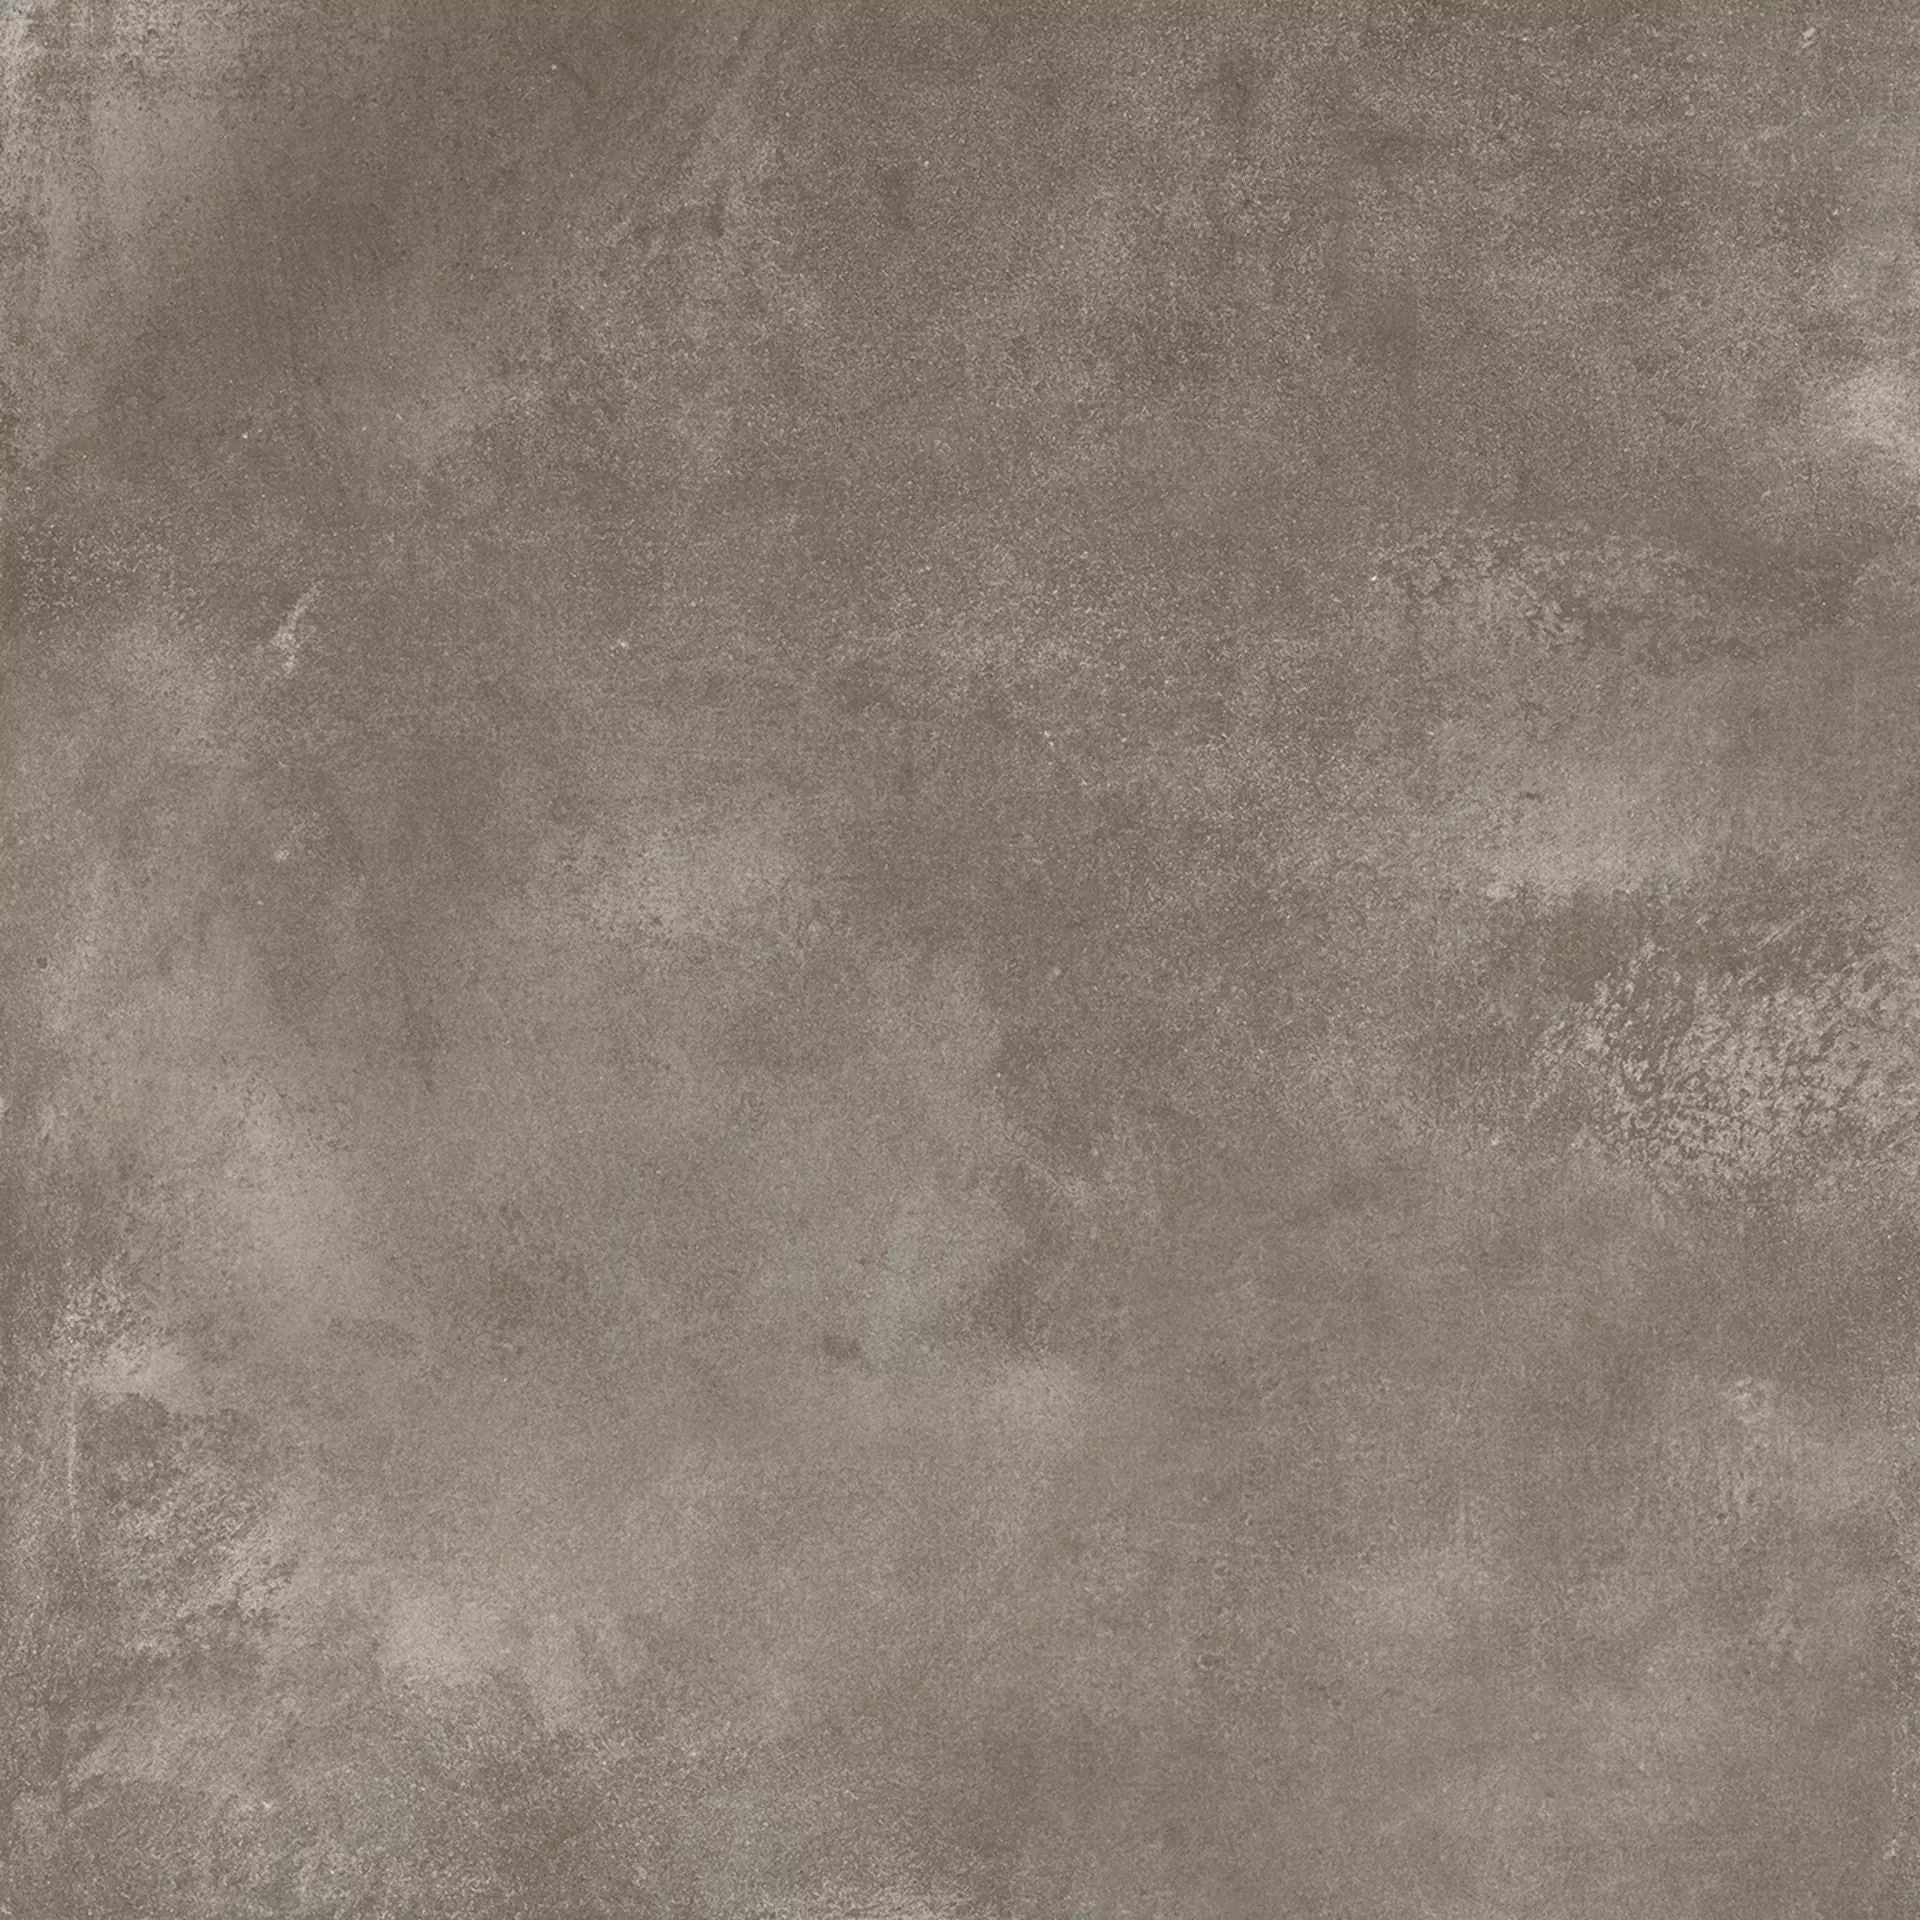 Rondine Volcano Taupe Naturale J88999 100x100cm rectified 8,5mm